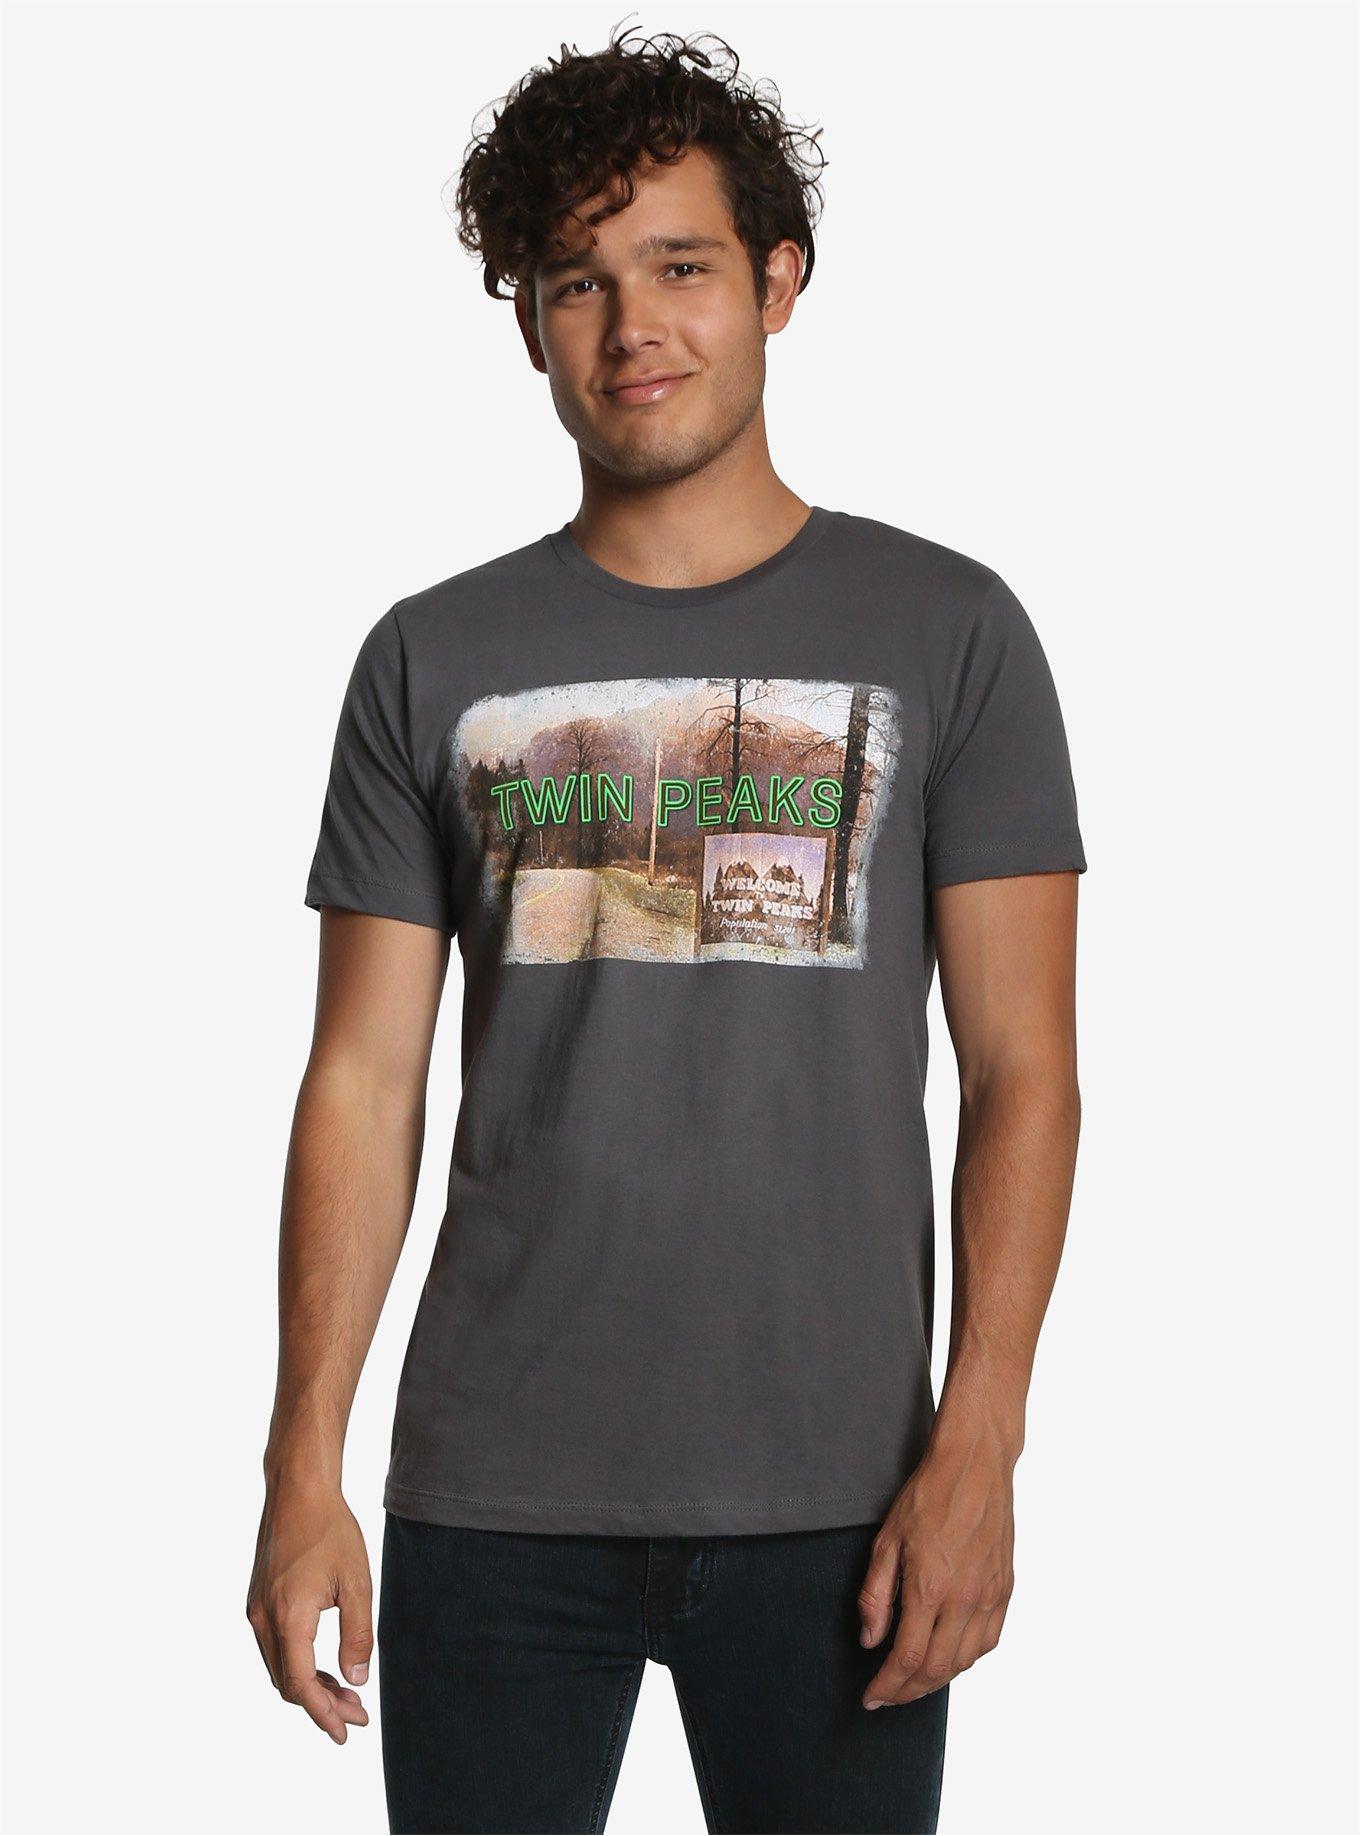 Twin Peaks Welcome T-Shirt | BoxLunch